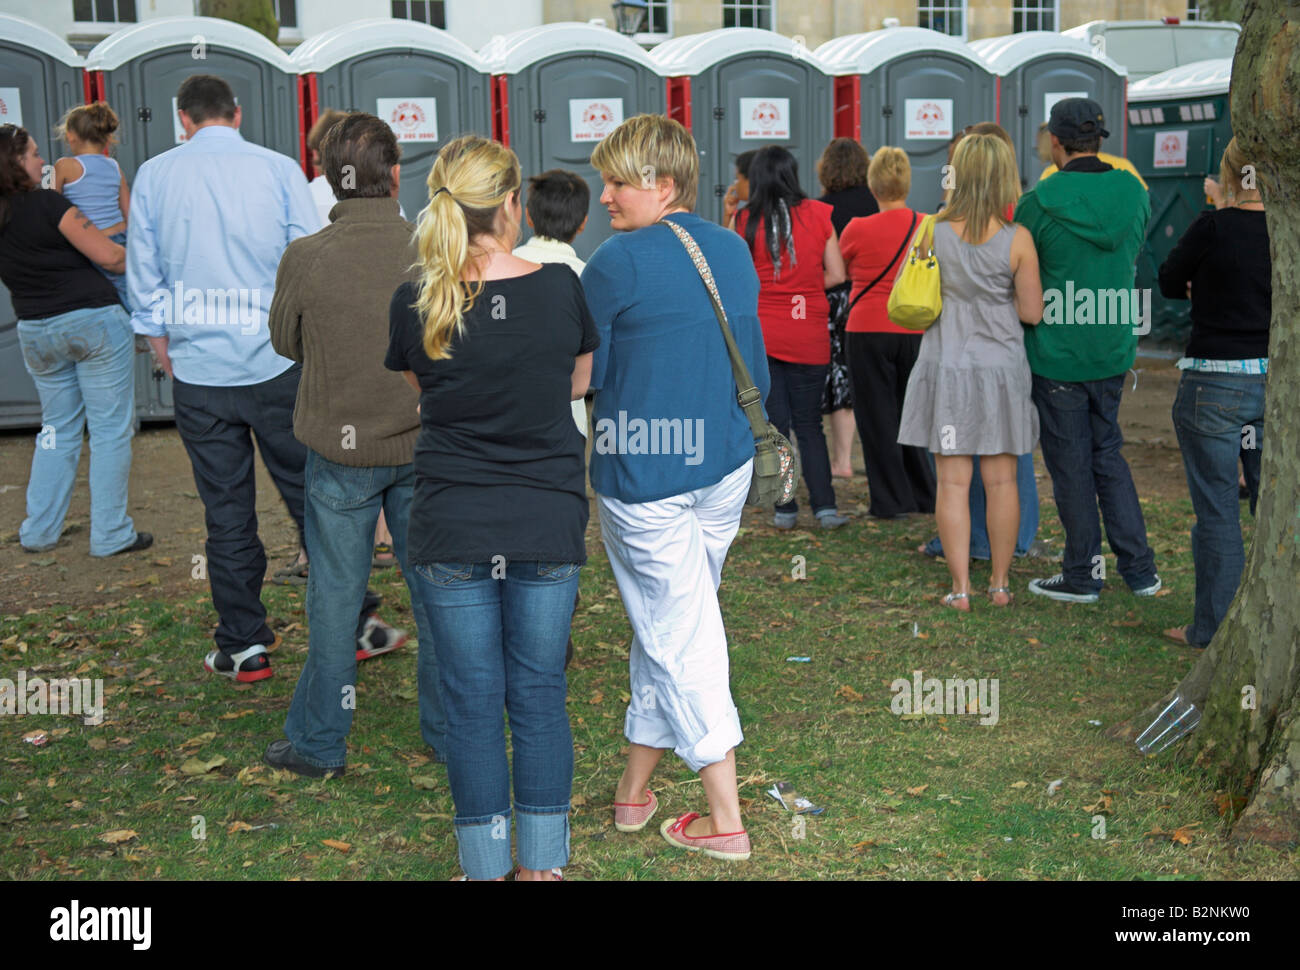 People waiting to use portable toilets Stock Photo